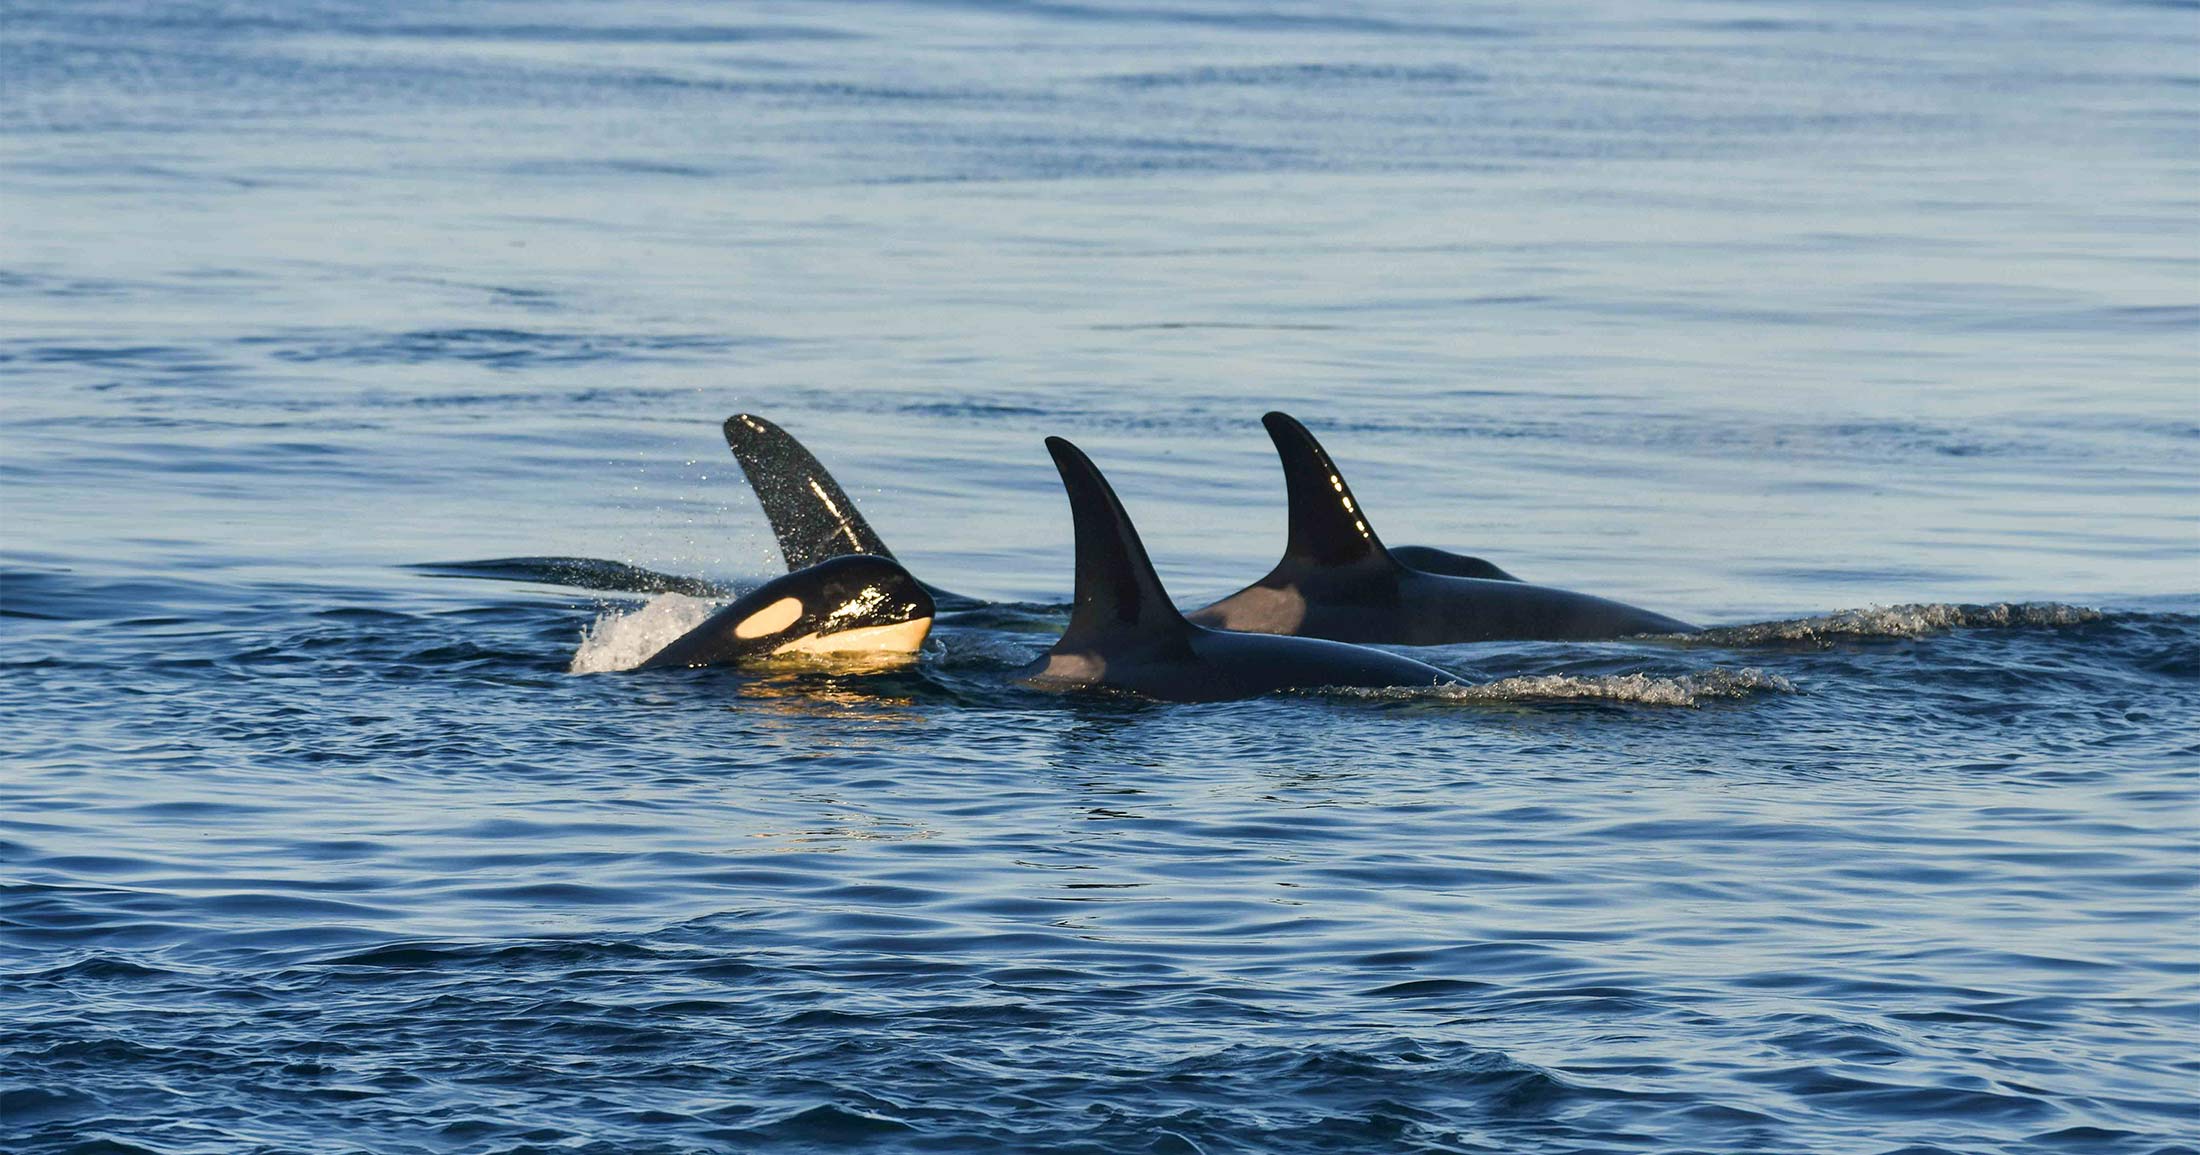 Killer whales surfacing during the sunset.